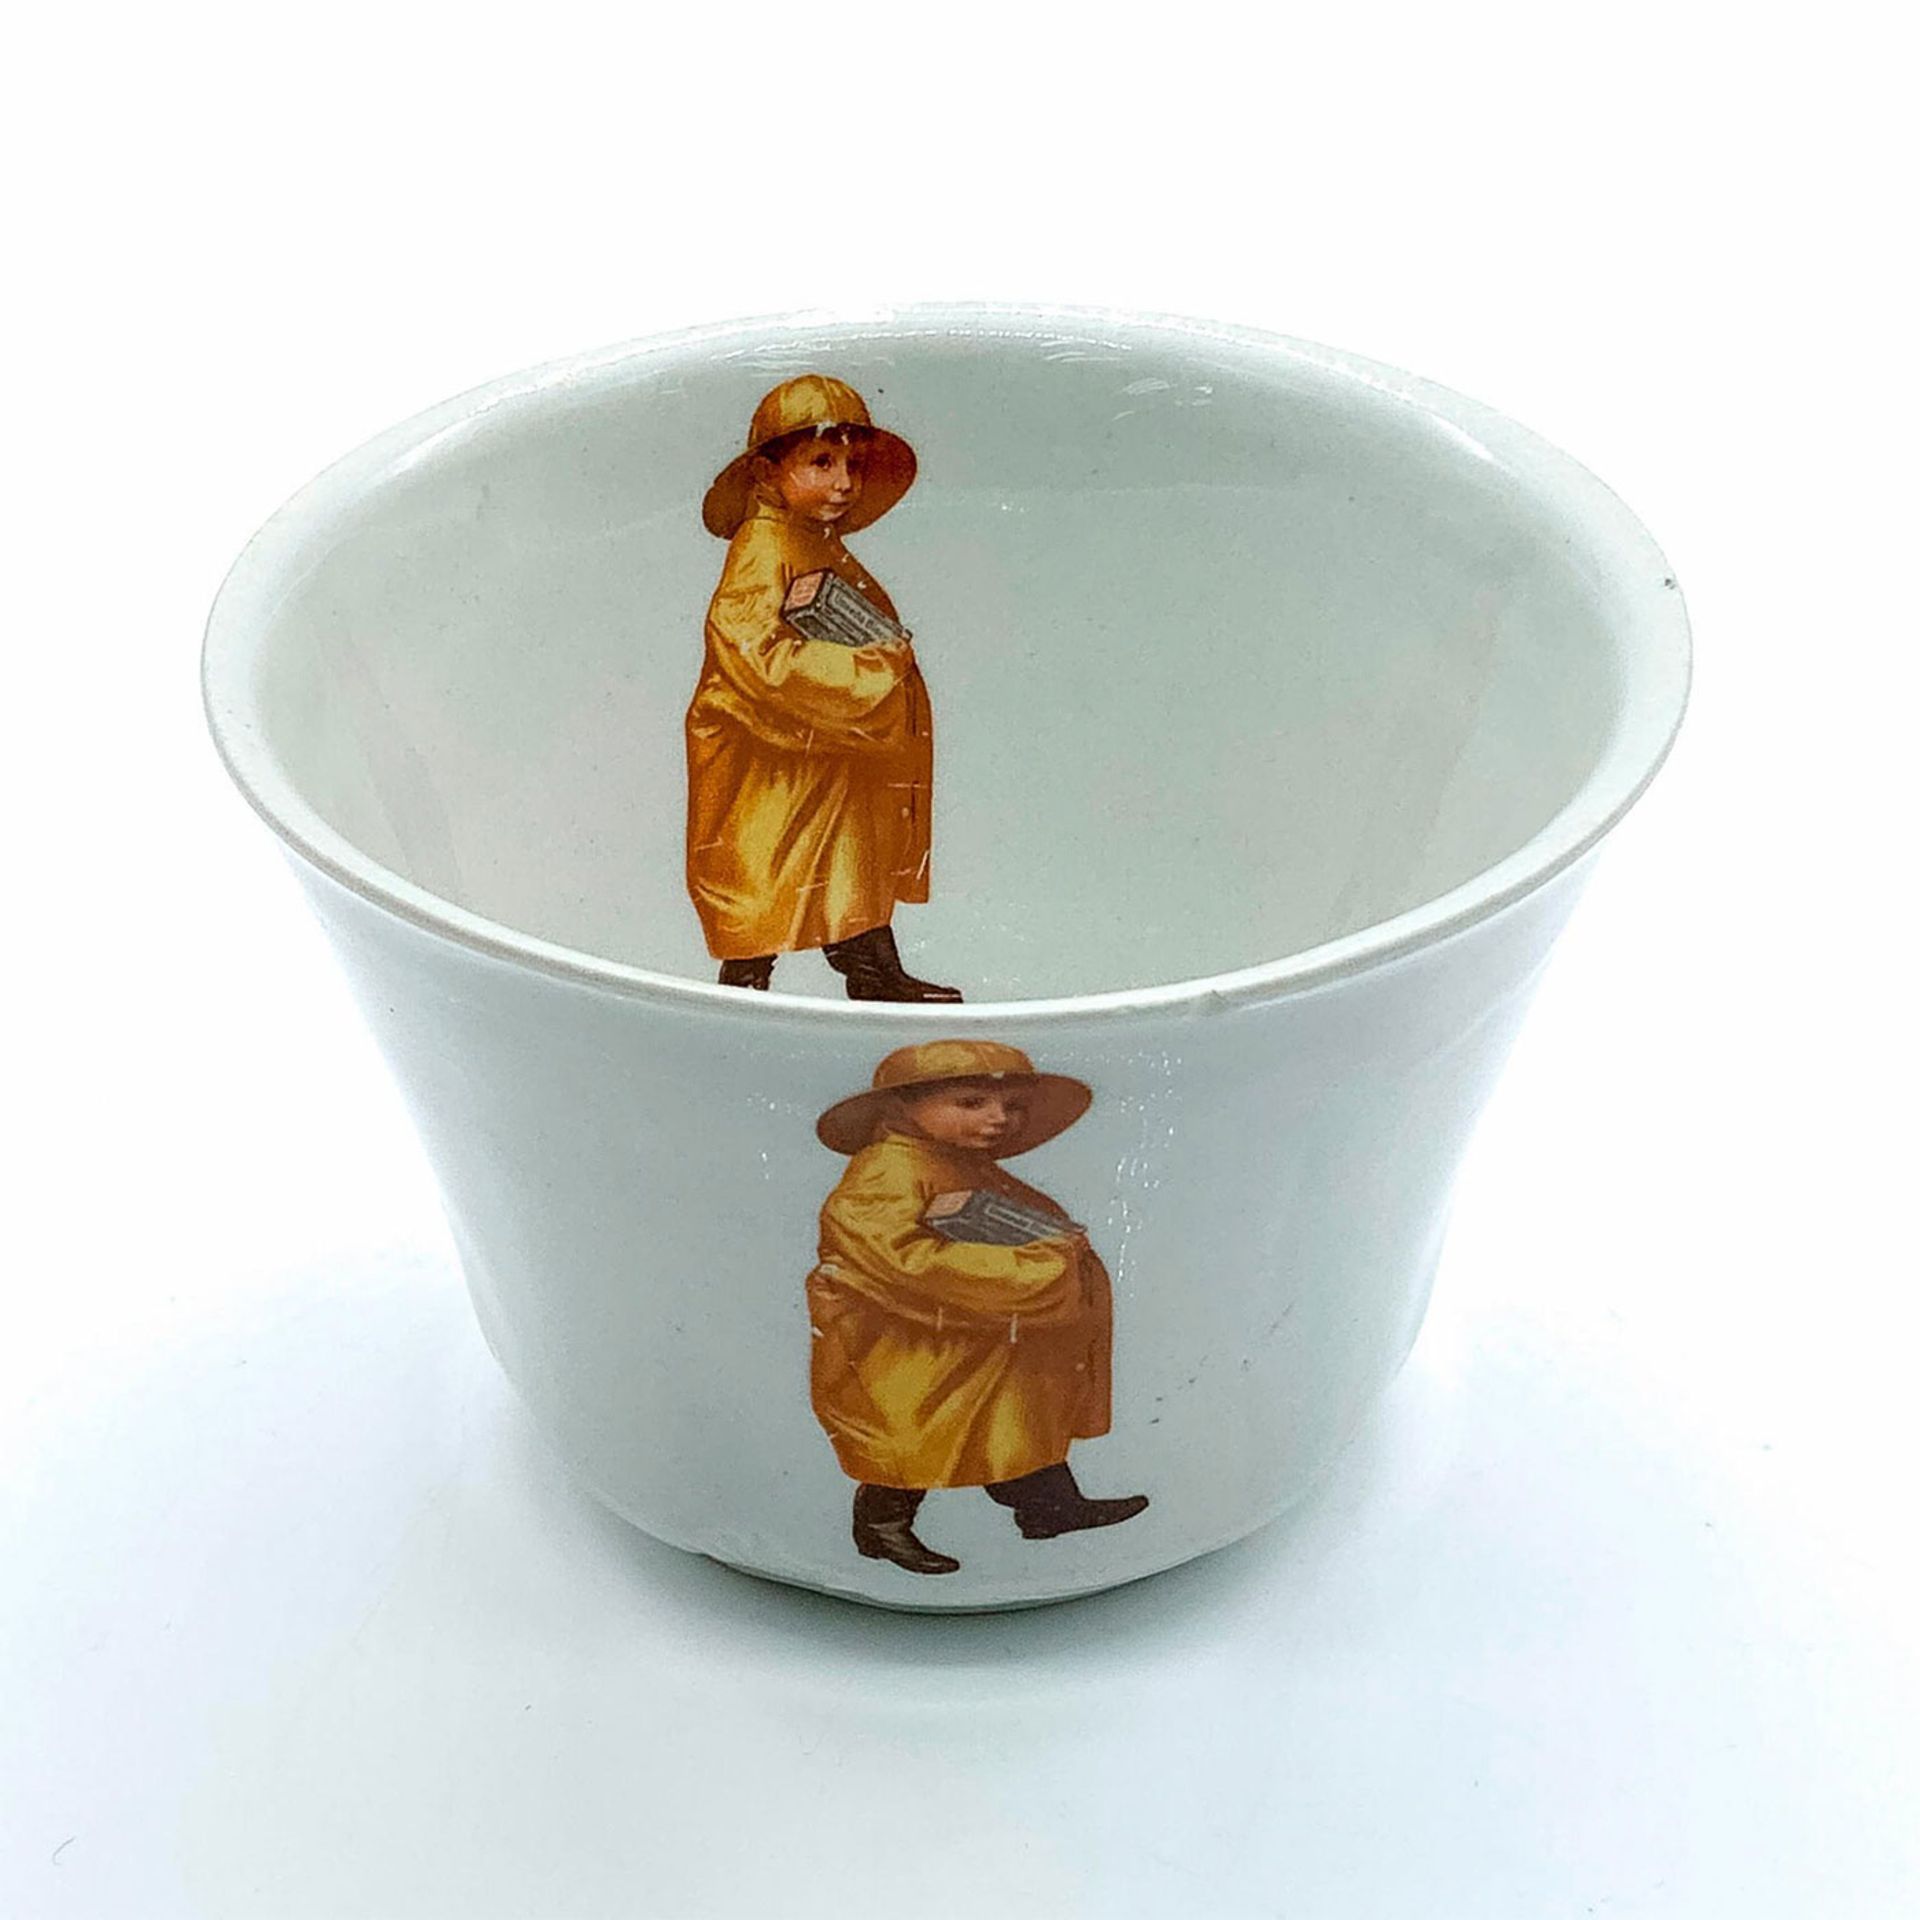 Cute Young Boy in Yellow Raincoat Decorative Ceramic Bowl - Image 2 of 3